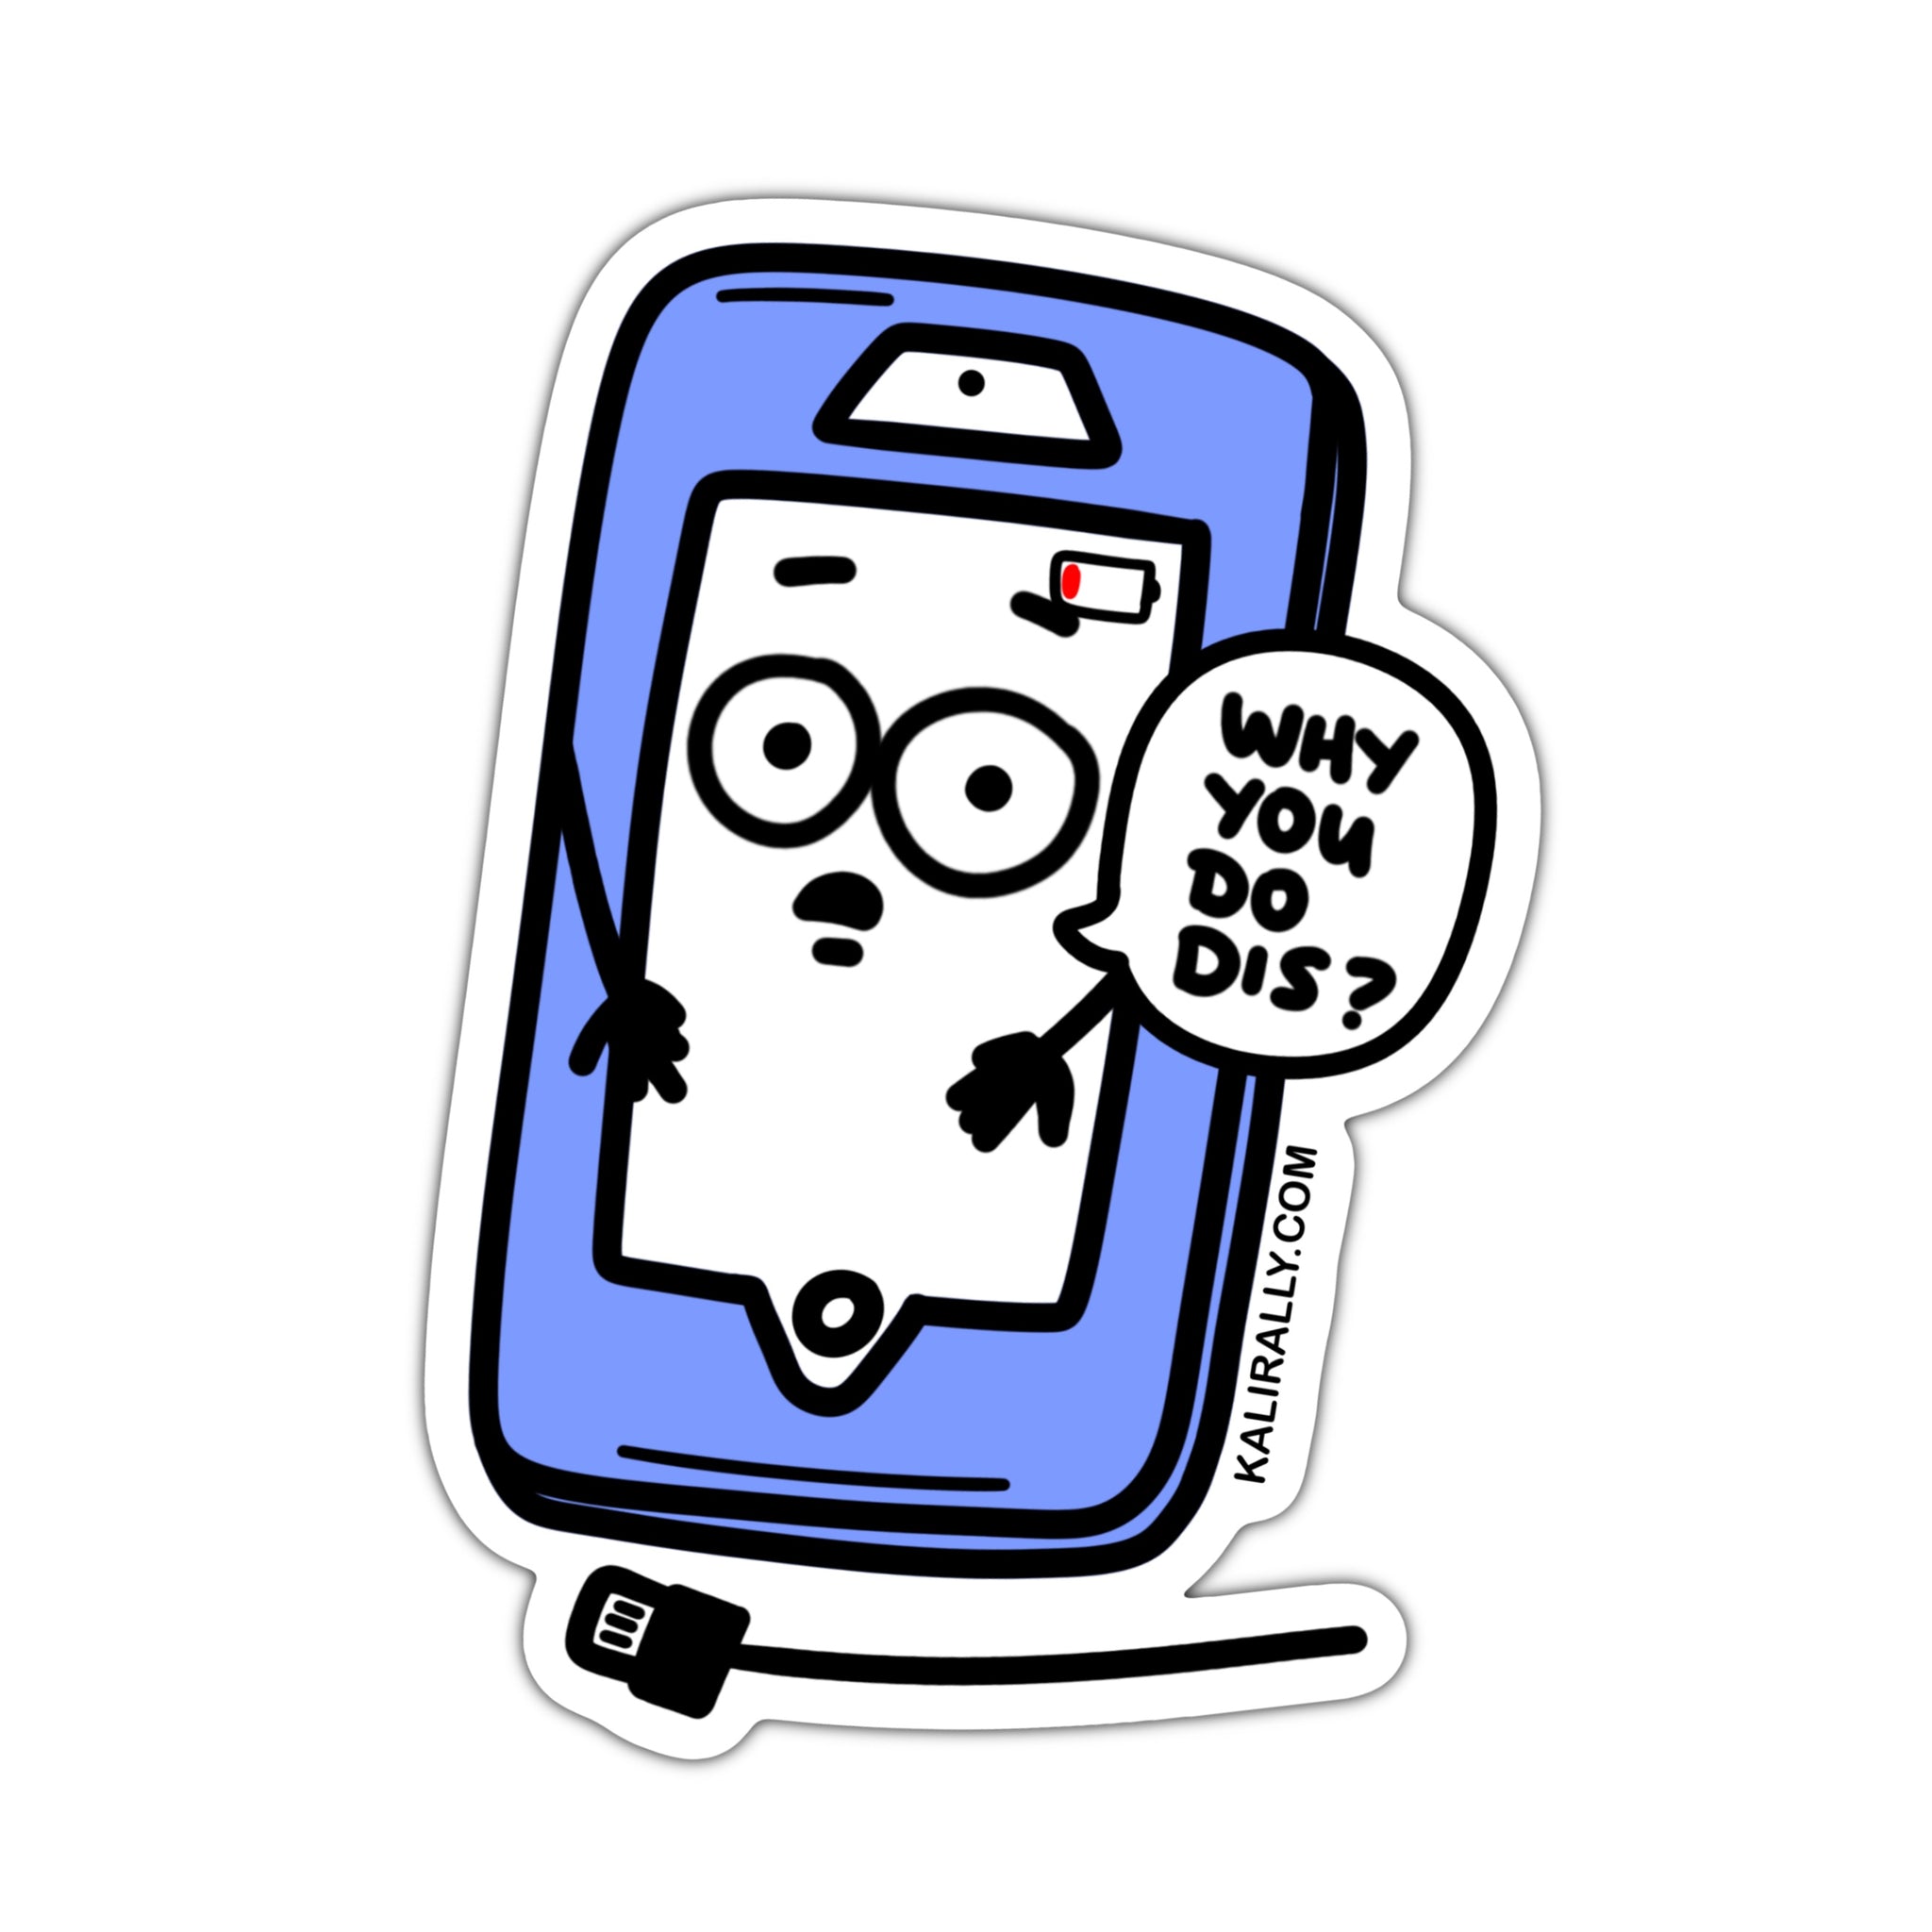 Life with iPhone funny dead phone sticker, waterproof sticker